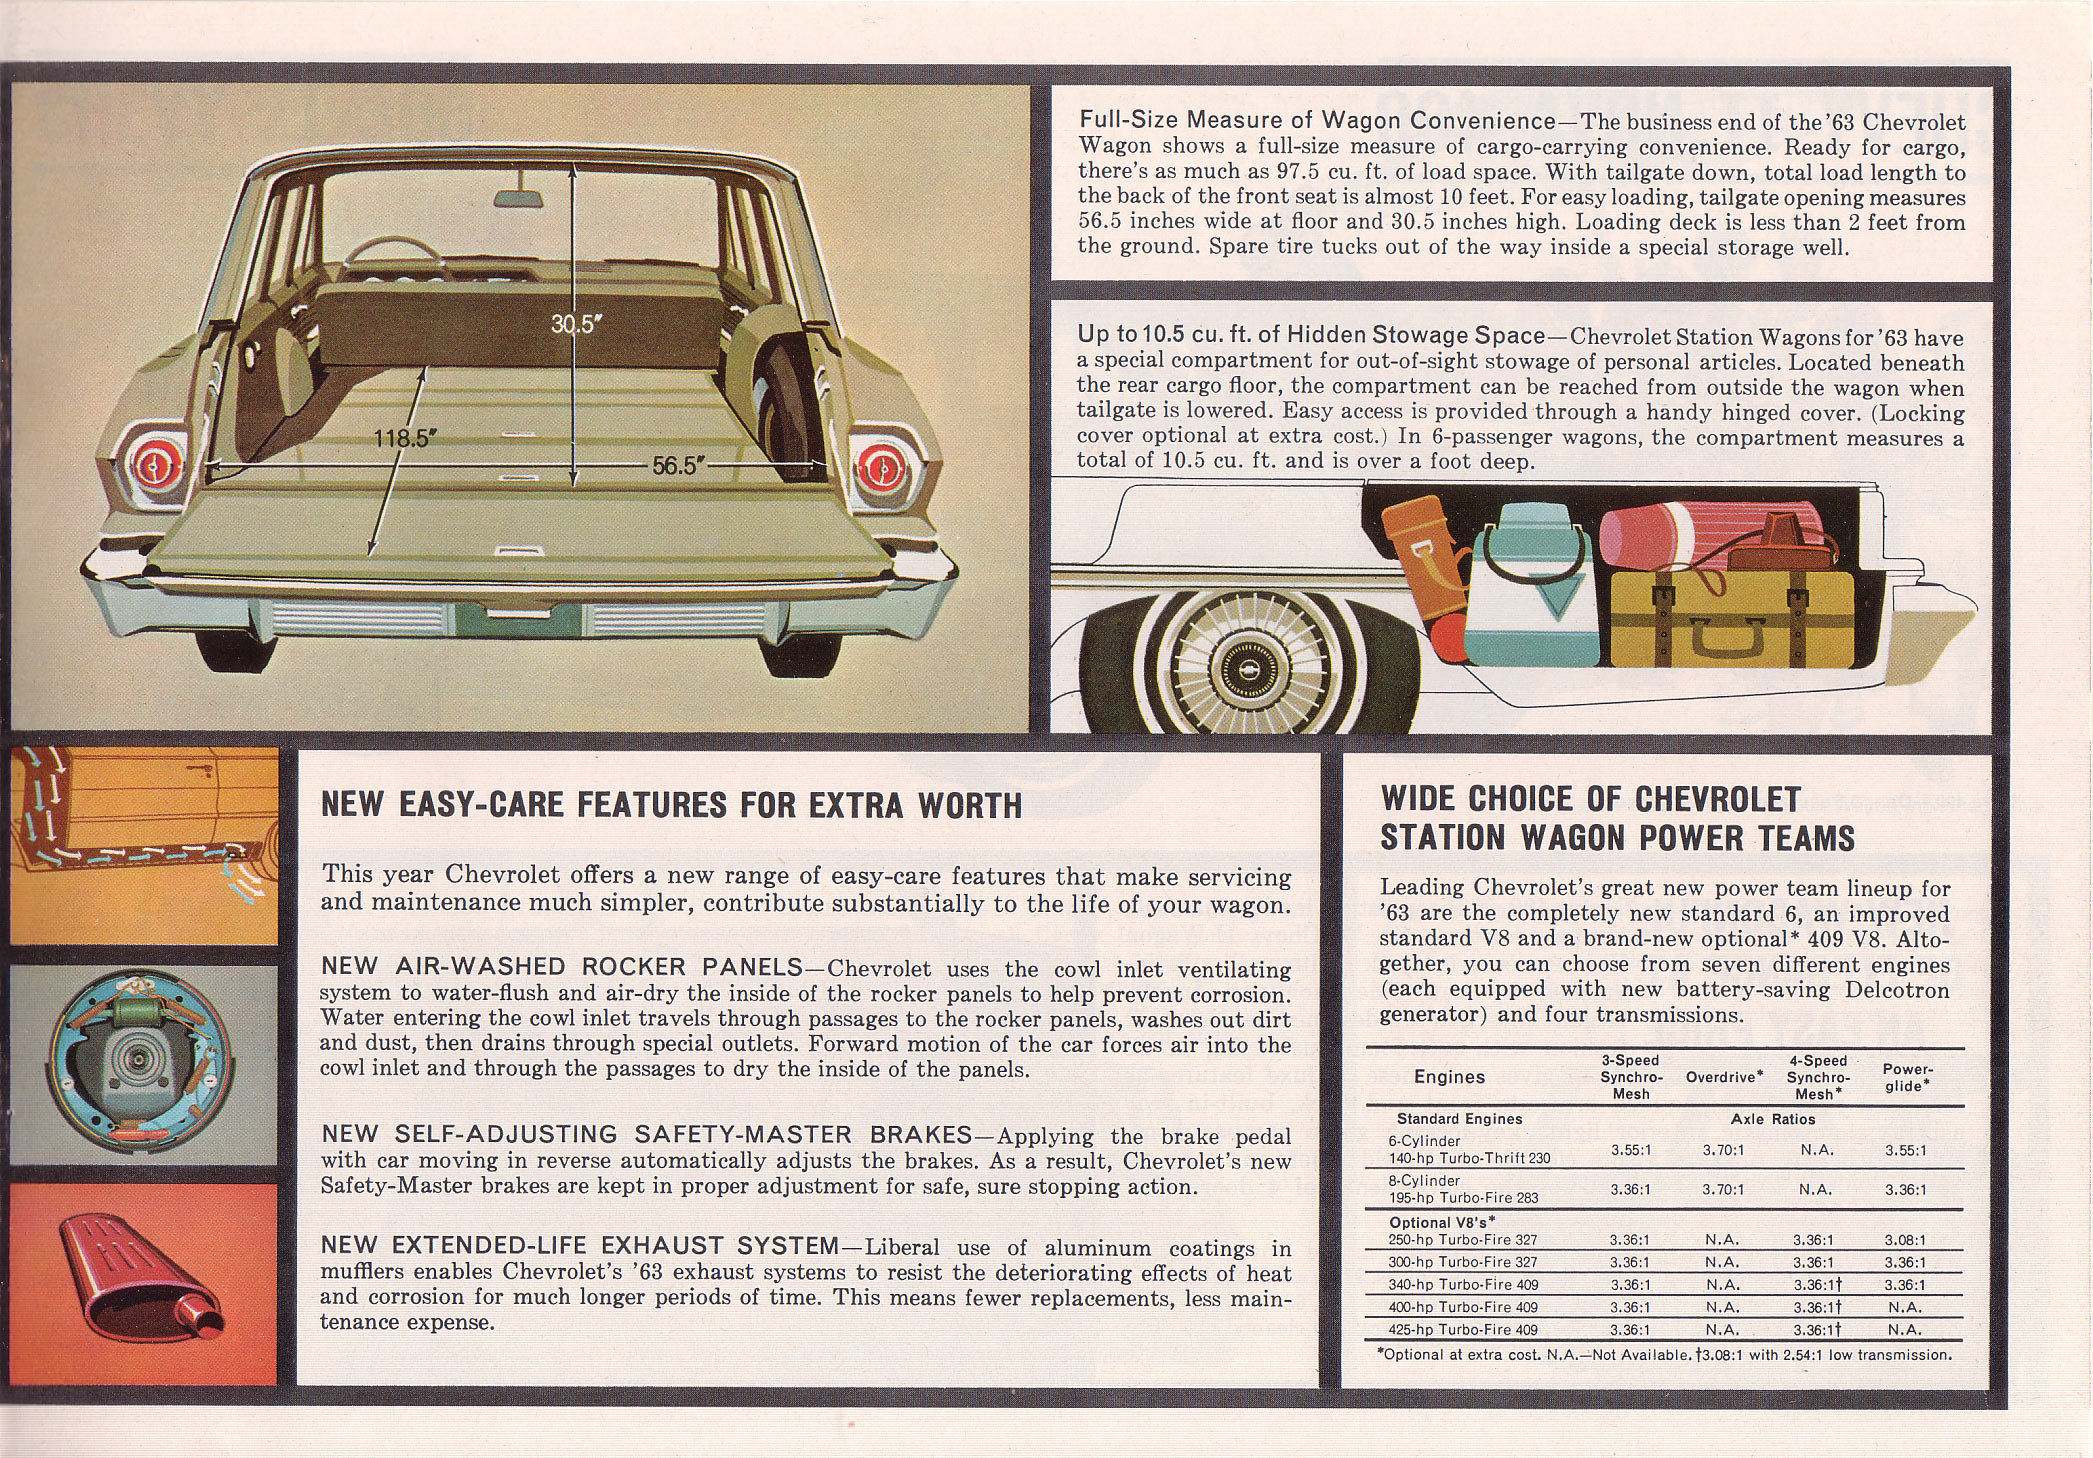 1963 Chevrolet Wagons Brochure Page 6